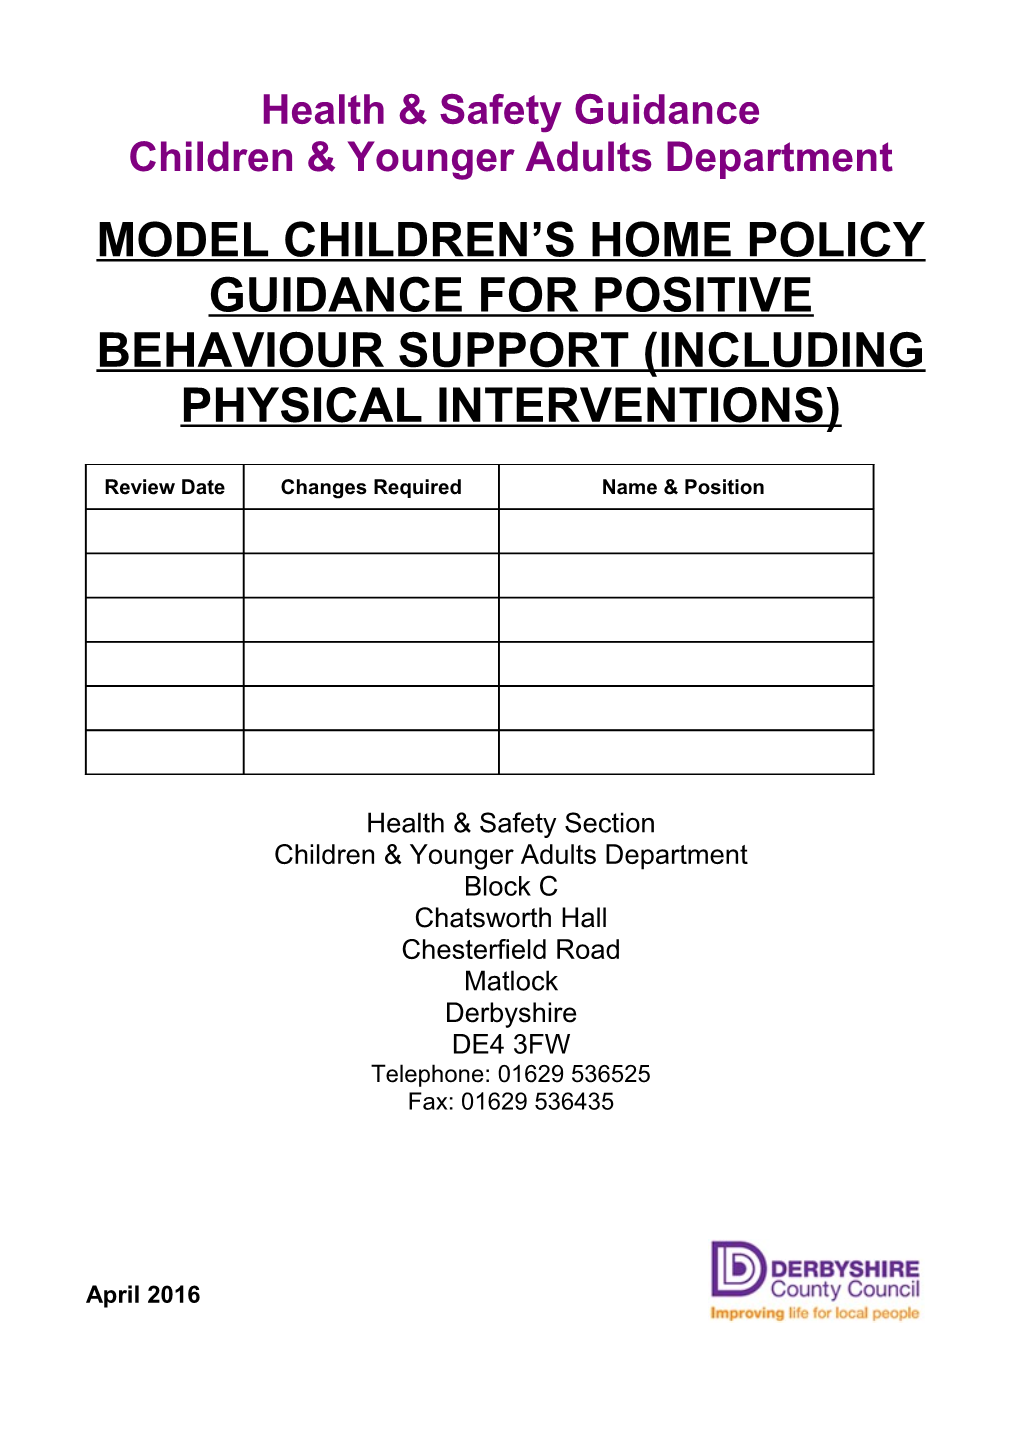 Model School Policy for Physical Interventions